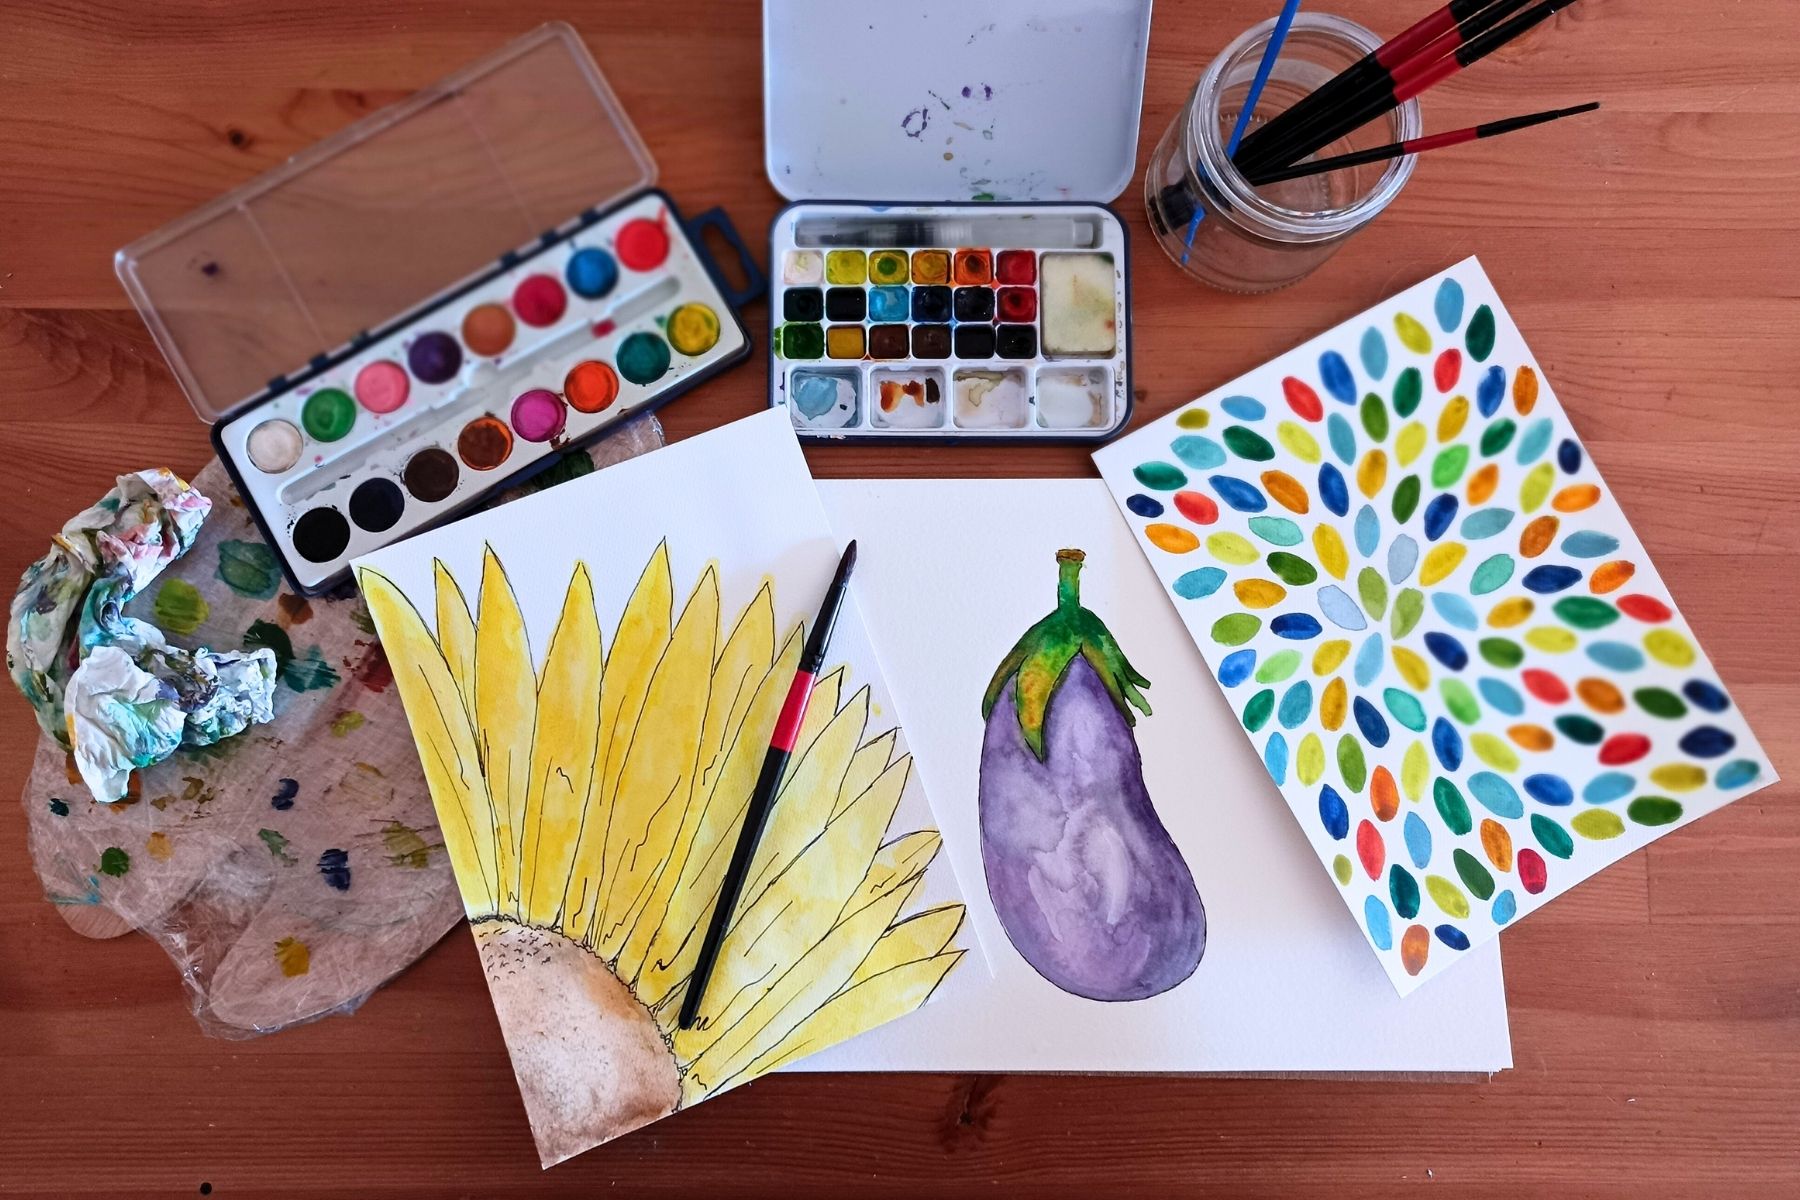 Watercolor for beginners: An in-depth guide for watercolor newbies